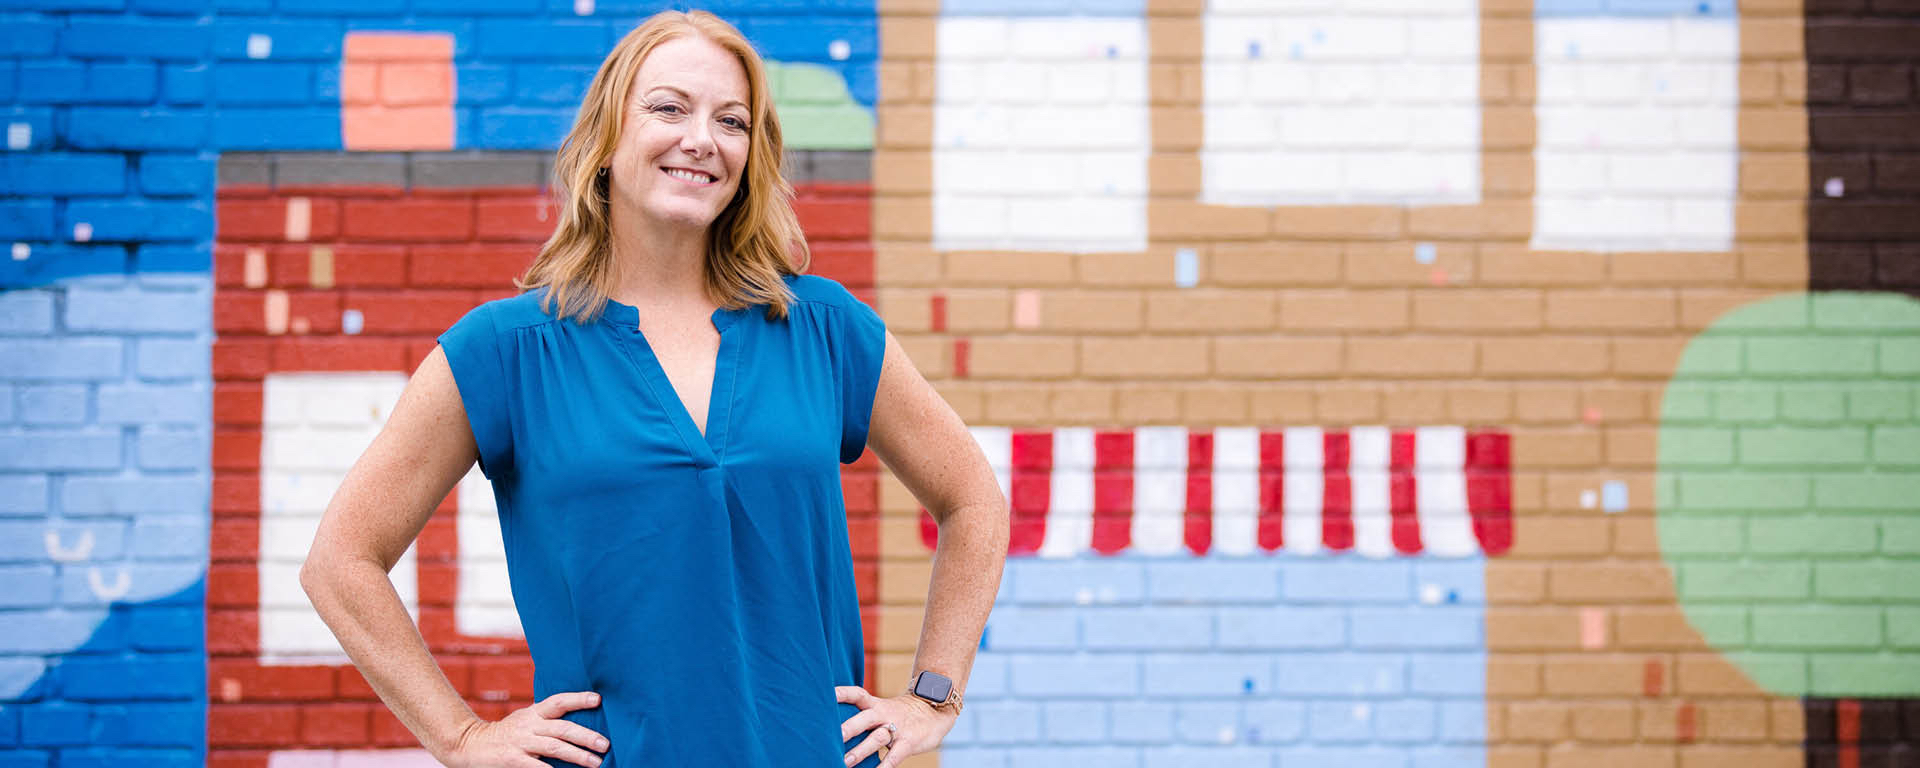 Heather Winkle, Capital One Senior VP & Head of Experience Design, stands and smiles in front of a brick wall with painted buildings on it